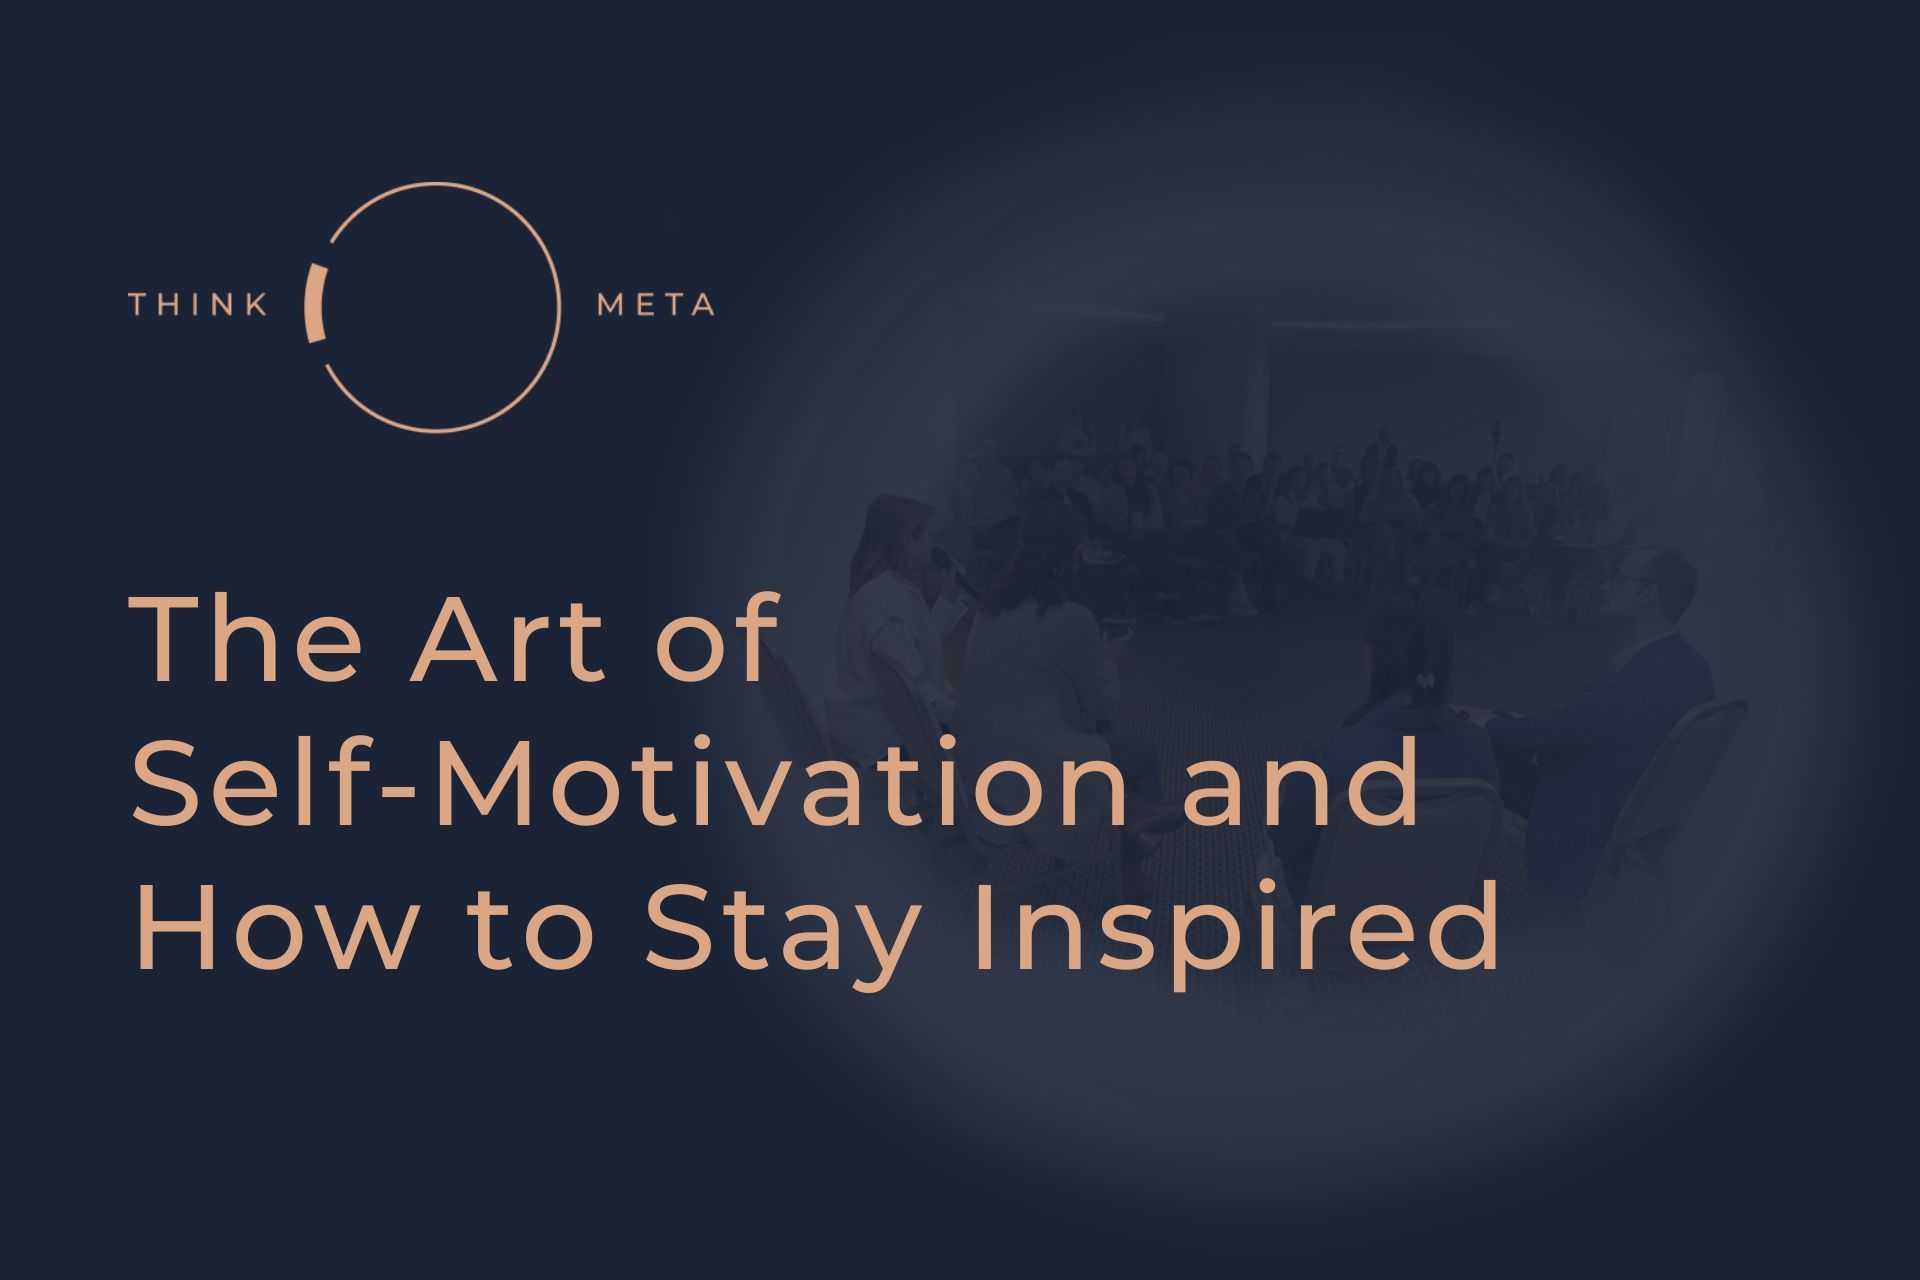 The Art of Self-Motivation and How to Stay Inspired